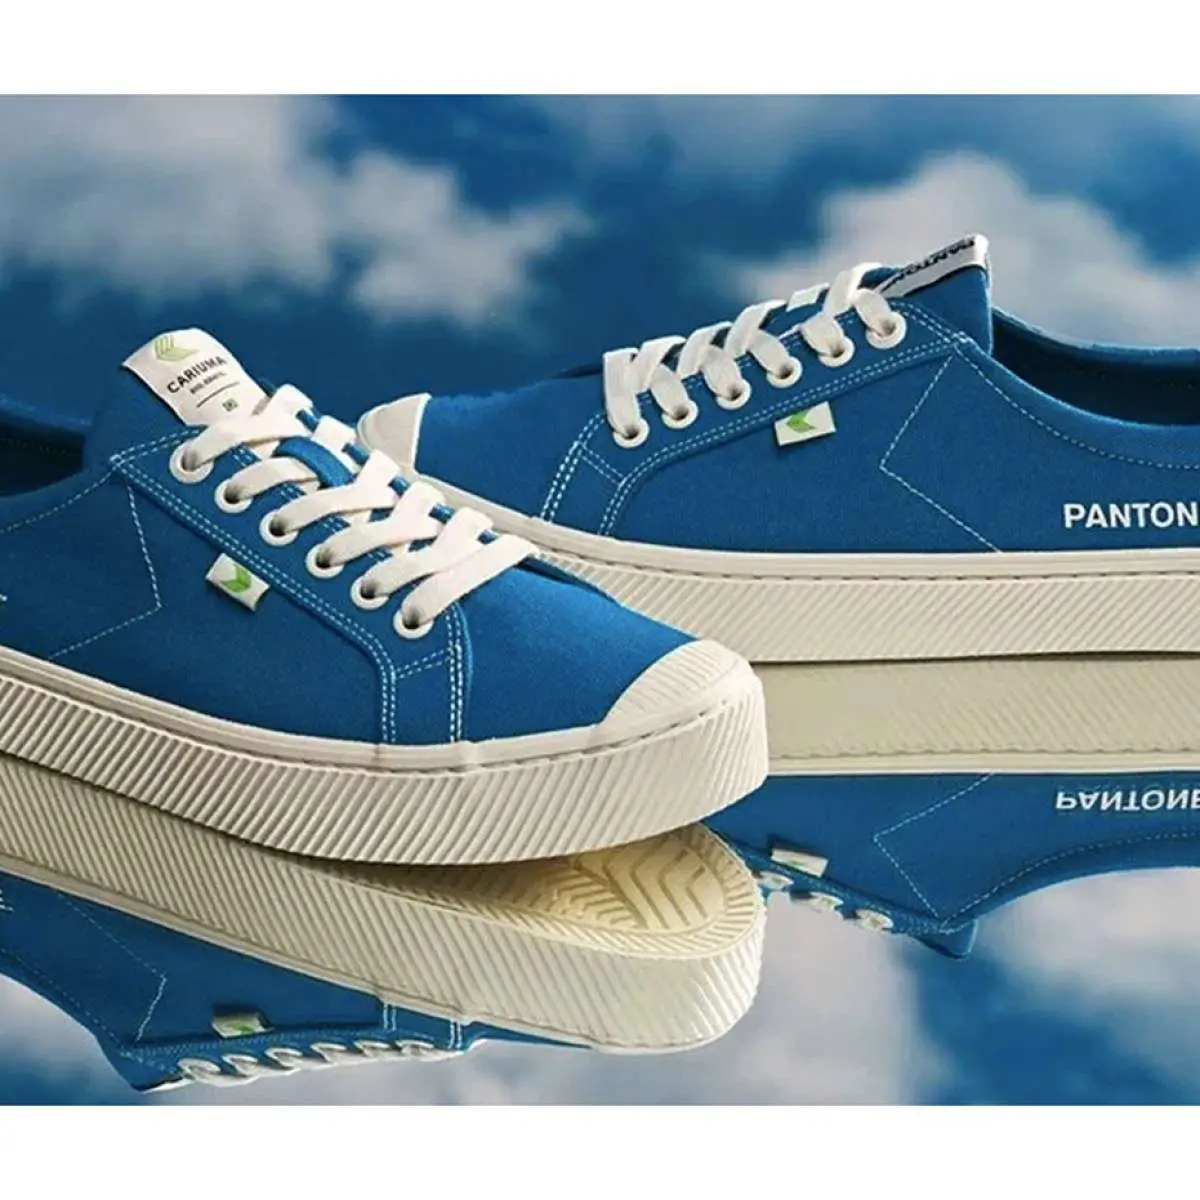 These Cariuma Sneakers All Stun in Pantones Color of the Year